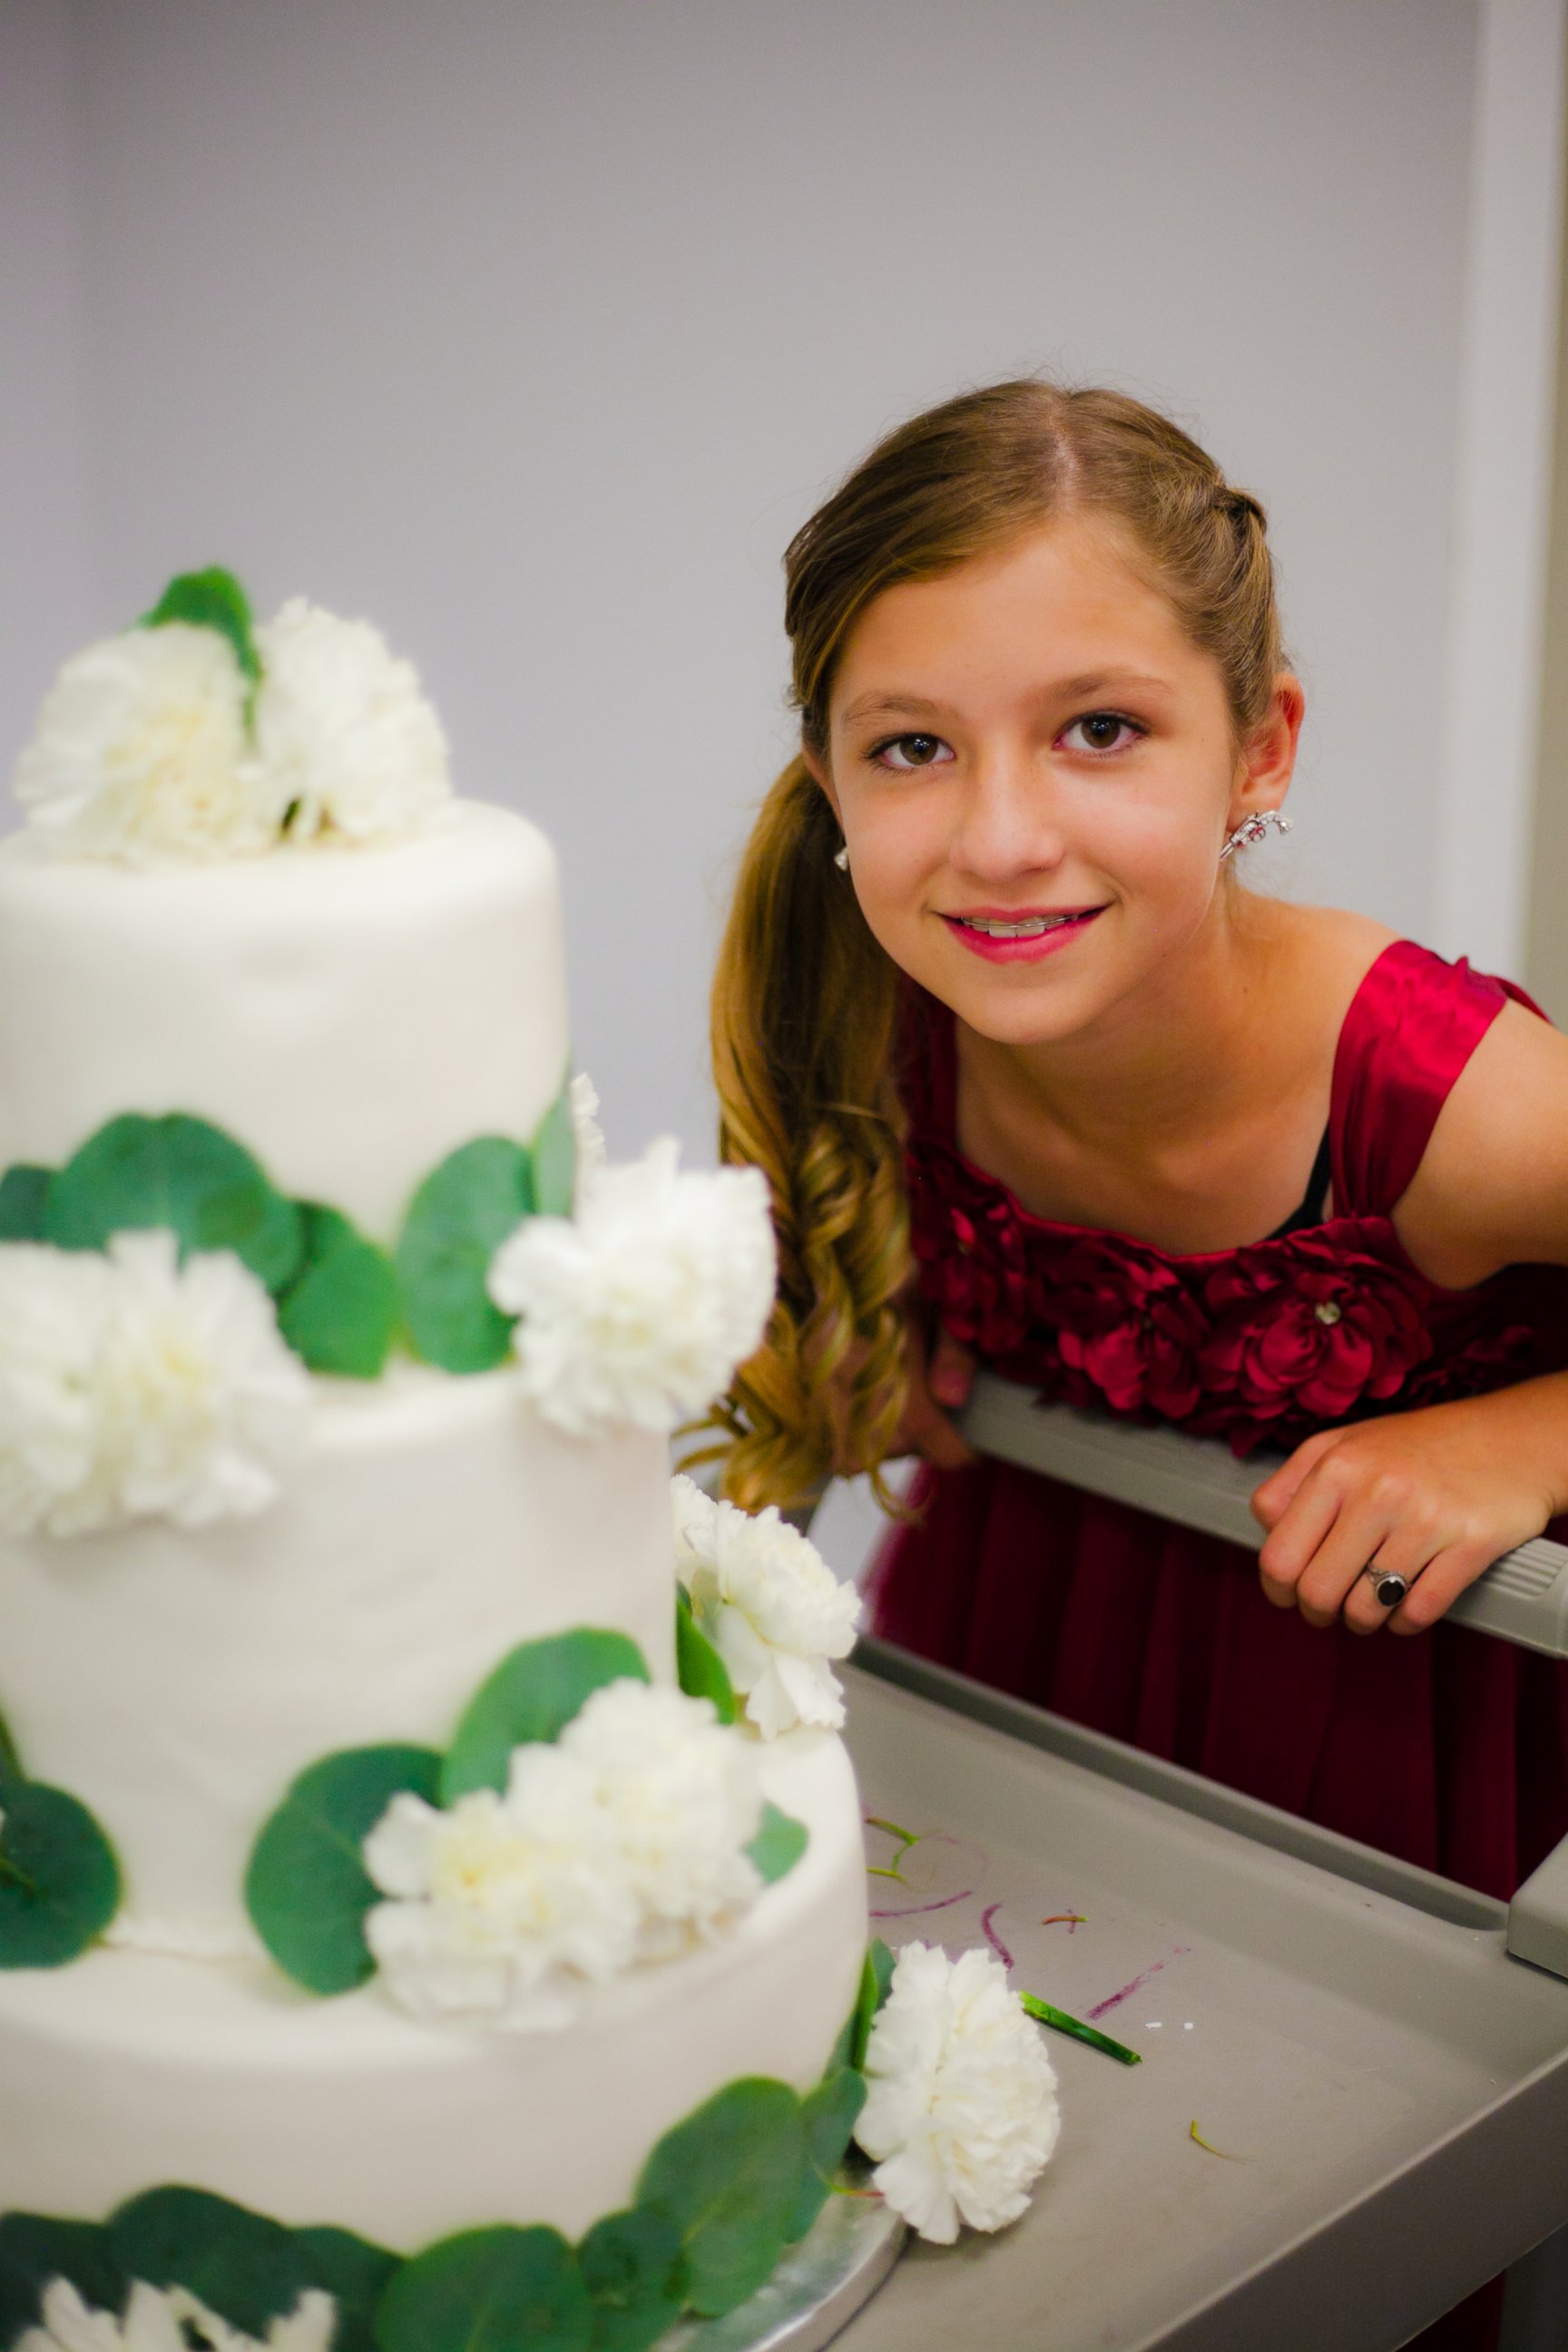 PHOTO:The wedding cake baker, a 12-year-old girl, is also on the spectrum.